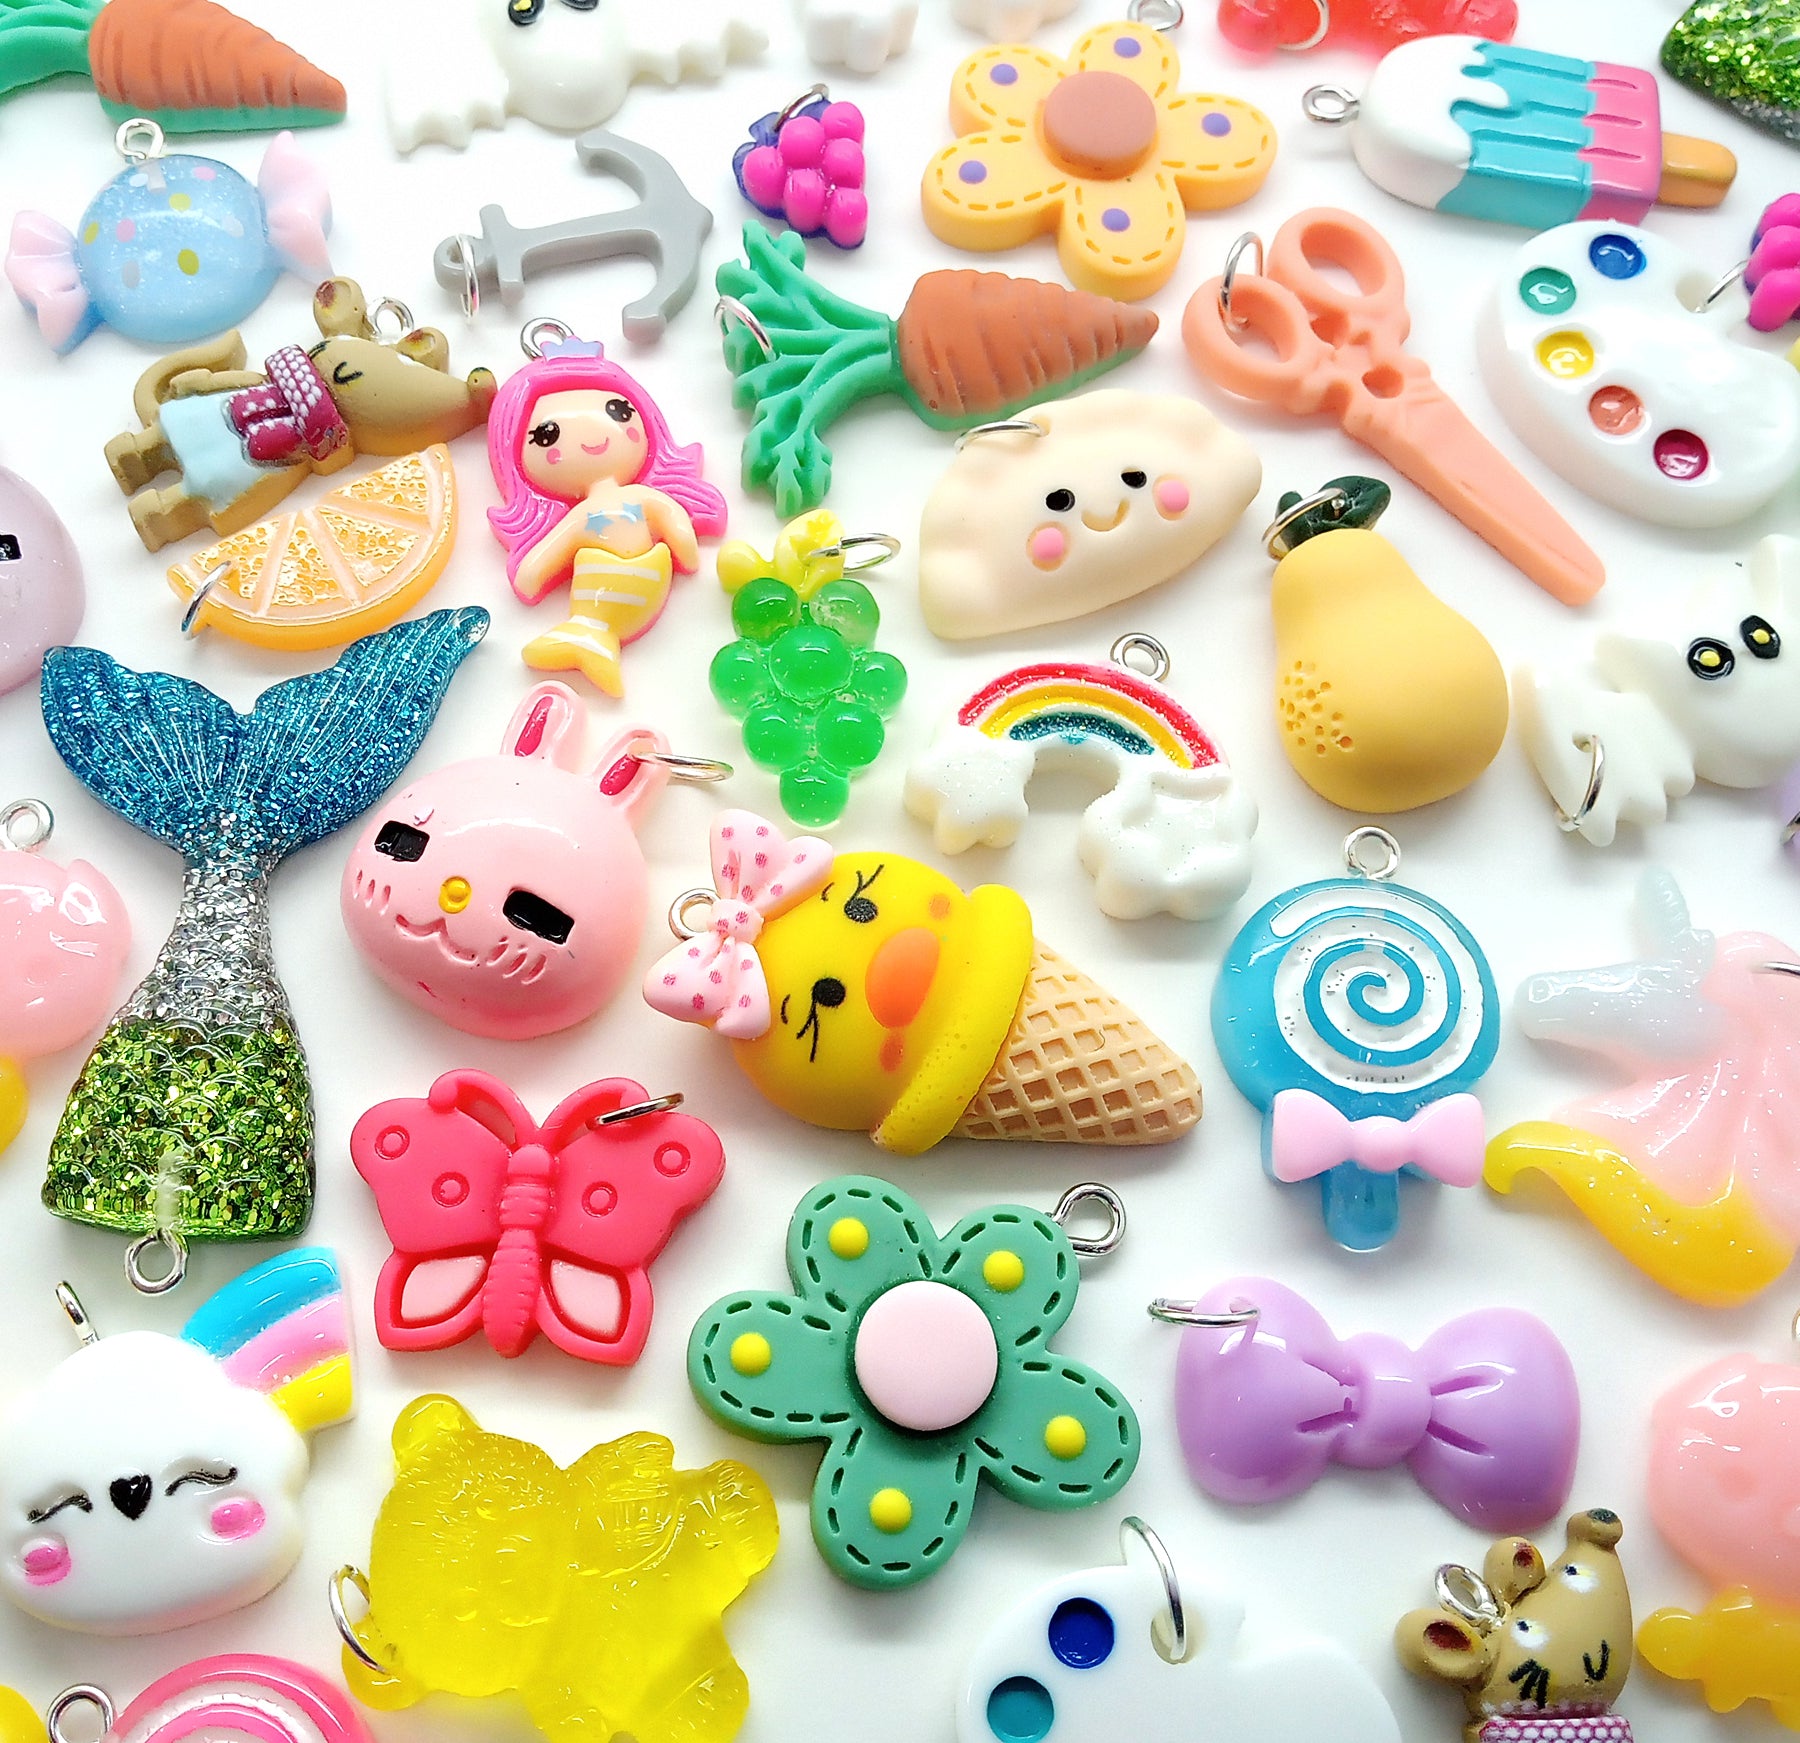 20 Pcs Resin Charms for Jewelry Making Resin Charms for Hair Bows